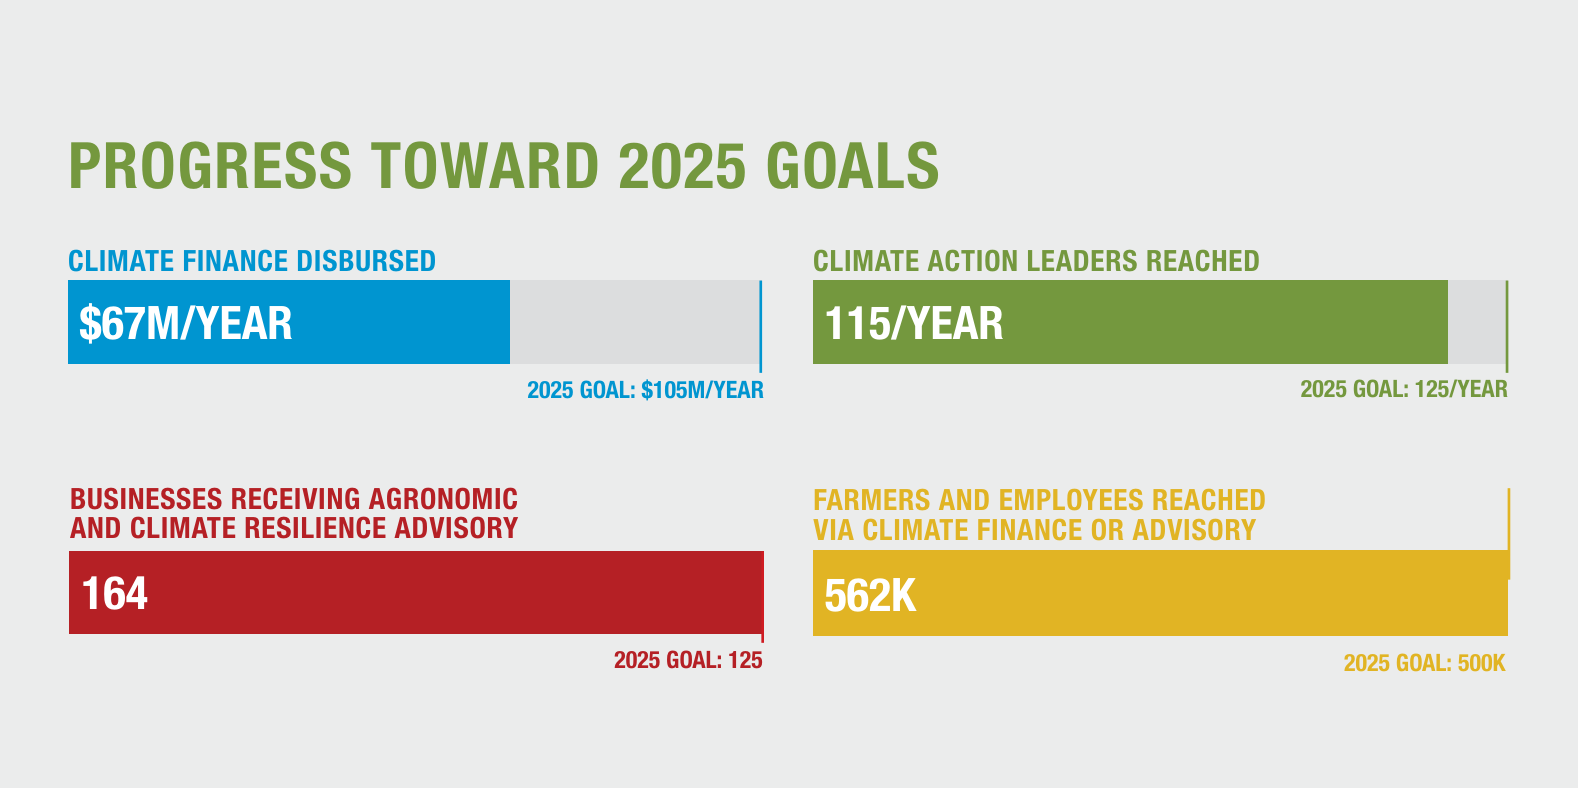 PROGRESS TOWARD 2025 GOALS (will be displayed as a graphic in the final report) ● Climate Finance Disbursed (2025 Goal: $105M/year): $67M ● Climate Action Leaders Reached (2025 Goal: 125/year): 115 ● Businesses Receiving Agronomic and Climate Resilience Advisory (2025 goal: 125): 164 ● Farmers And Employees Reached via Climate Finance or Advisory (2025 goal: 500k): 562k